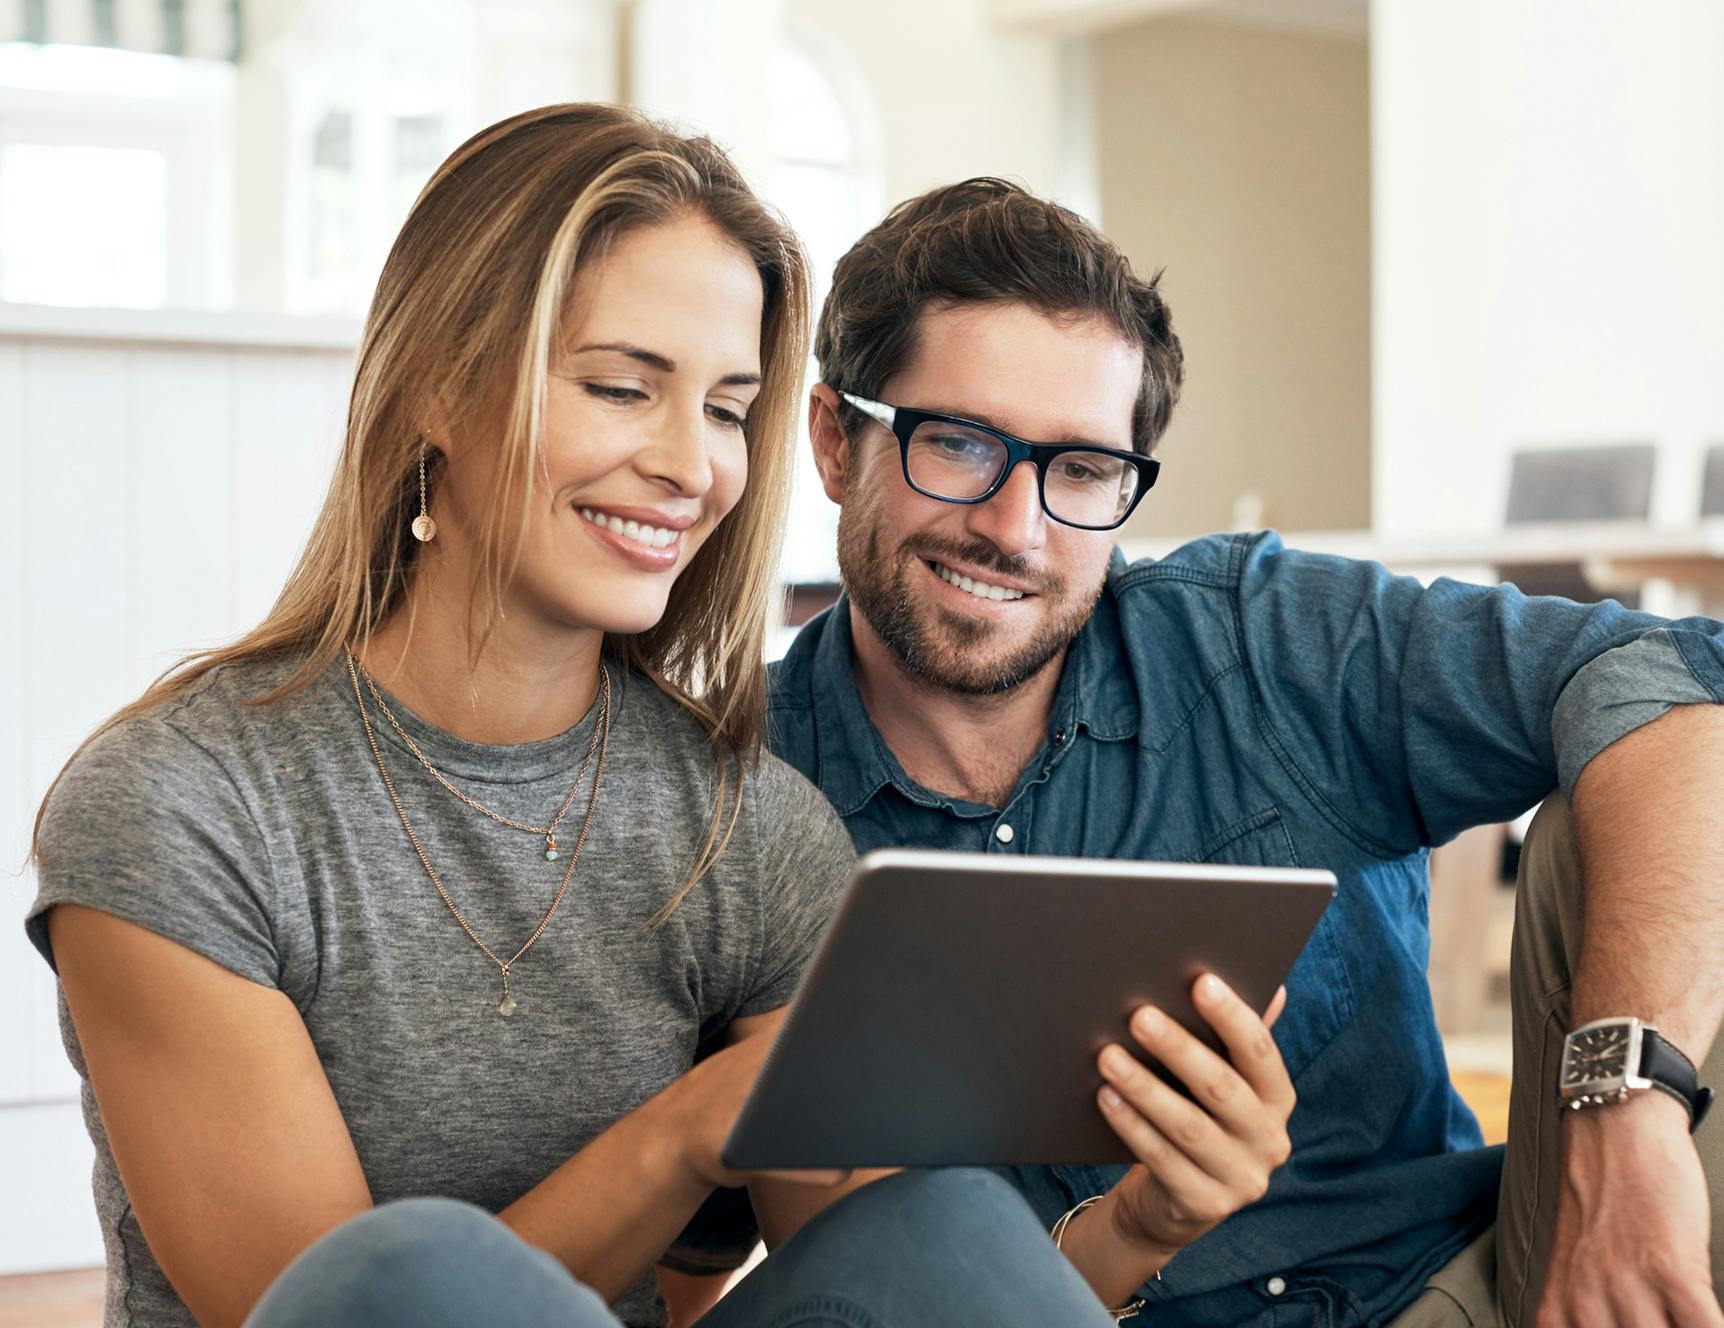 Man and woman smiling and sitting on the floor looking at laptop